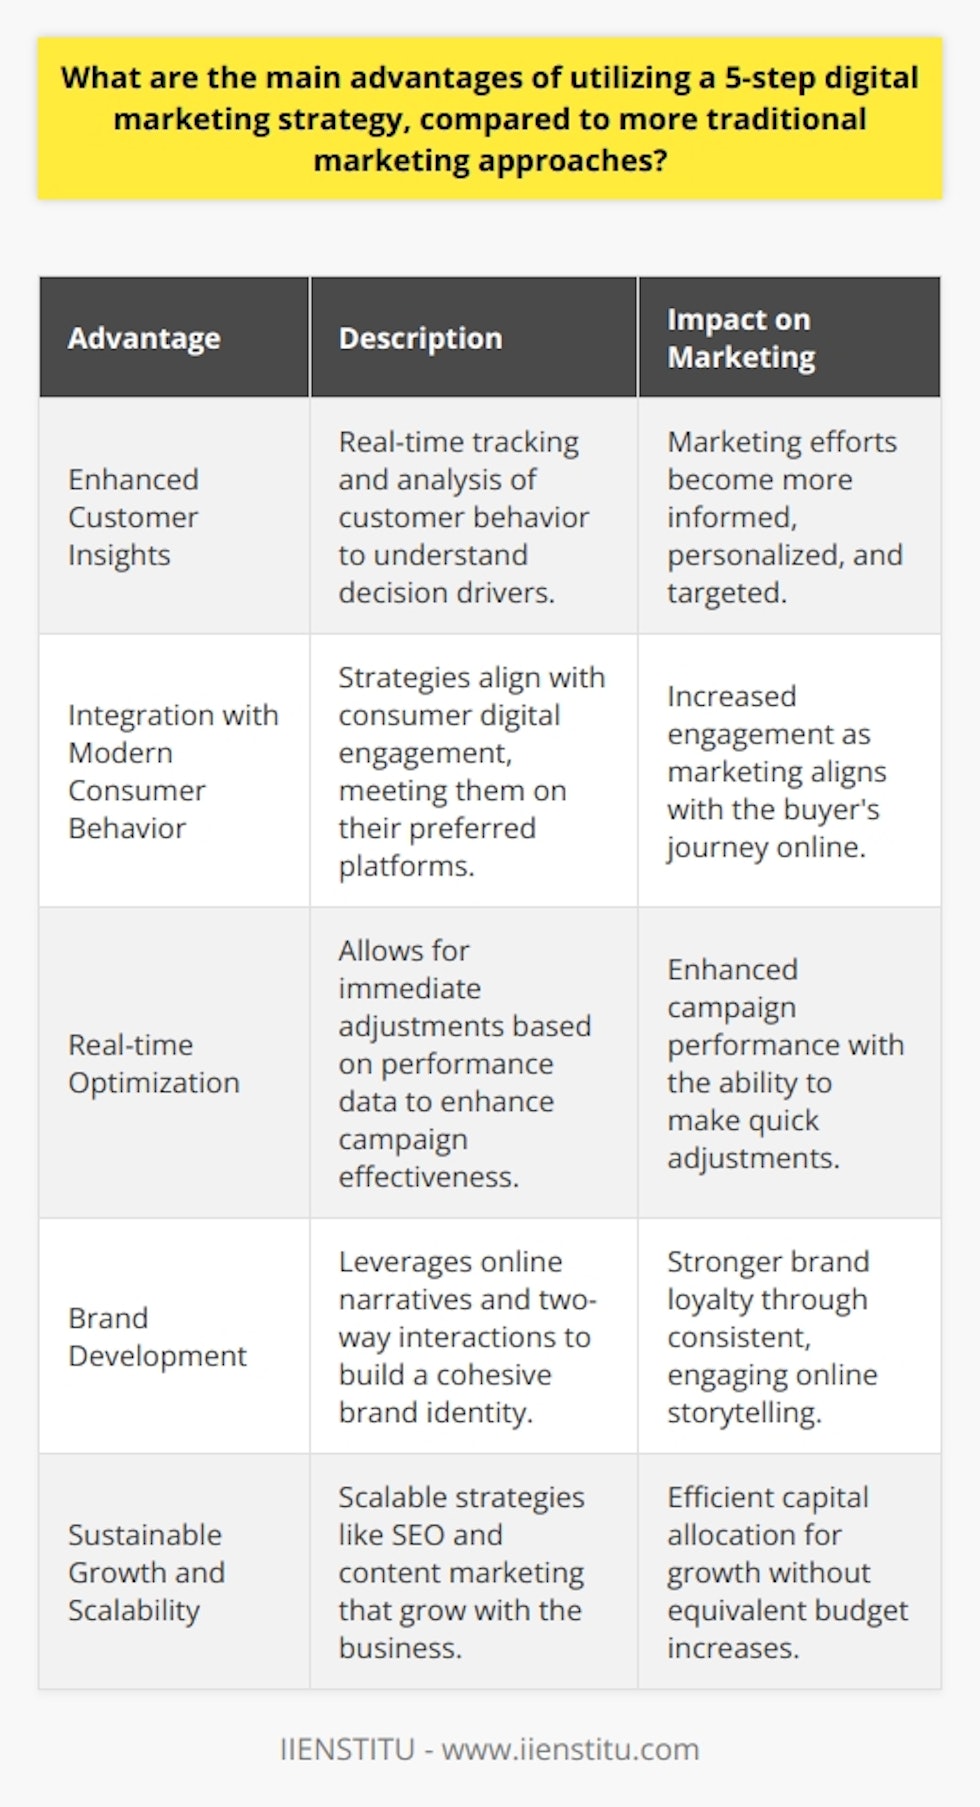 When deploying a 5-step digital marketing strategy, companies enjoy notable advantages over traditional marketing methods. Here are five key benefits:**Enhanced Customer Insights**One of the greatest advantages of a digital marketing strategy is enhanced customer insights. With traditional marketing, understanding customer behavior and preferences is largely based on assumptions or delayed feedback. A 5-step digital strategy involves active customer analysis. By leveraging digital tools, companies can track customer actions in real time, gain insights into their behaviors, and understand what drives their decisions. As a result, marketing efforts are more informed, personalized, and effective.**Integration with Modern Consumer Behavior**In today's digital age, consumers are spending an increasing amount of time online. With a 5-step digital marketing strategy, businesses can align their marketing efforts with contemporary consumer behavior. Traditional marketing fails to engage the digital-savvy audience effectively, whereas digital marketing meets customers where they spend their time - be it on social media, search engines, or email. Through a well-thought-out digital presence, businesses can communicate with their audience throughout various stages of the buyer’s journey. **Real-time Optimization**A dynamic digital marketing strategy allows for real-time campaign optimization. In historical marketing contexts, once a campaign was live - like a print ad or a television commercial - it was nearly impossible to alter without incurring high costs and delays. In a digital realm, a 5-step approach involves constant monitoring and tweaking. Analytics and performance data guide immediate adjustments - from refining ad copy to switching out visuals - to improve performance on the fly. **Brand Development**Digital marketing strategies, particularly when executed in a structured 5-step approach, can be instrumental in brand development. Online platforms offer unique opportunities for brands to create a cohesive narrative that resonates with their audience. Content can be crafted to tell a story, engage with consumers, and build brand loyalty in ways traditional marketing cannot match. Additionally, digital marketing brings with it the advantage of two-way communication - consumers can interact with and respond to brands, which in turn strengthens customer-brand relationships.**Sustainable Growth and Scalability**Lastly, digital marketing strategies are inherently scalable - a pivotal advantage for businesses aiming for sustainable growth. With traditional marketing, scaling often means a proportional increase in investment. In the digital world, however, strategies such as Search Engine Optimization (SEO), content marketing, and email automation offer a foundation that can support and grow with the business. Once a digital foundation is established, scaling up does not necessarily require commensurate budget increases, allowing for more efficient capital allocation and growth potential.By adopting a meticulous 5-step digital marketing strategy, businesses obtain the precision, adaptability, and efficiency required for success in an increasingly digital marketplace. While traditional marketing still holds value for certain objectives and audiences, the advantages of a well-implemented digital strategy can provide a competitive edge tailor-made for today's business landscape. Institutions like IIENSTITU provide resources and education to guide businesses through the nuances of these modern digital marketing strategies.